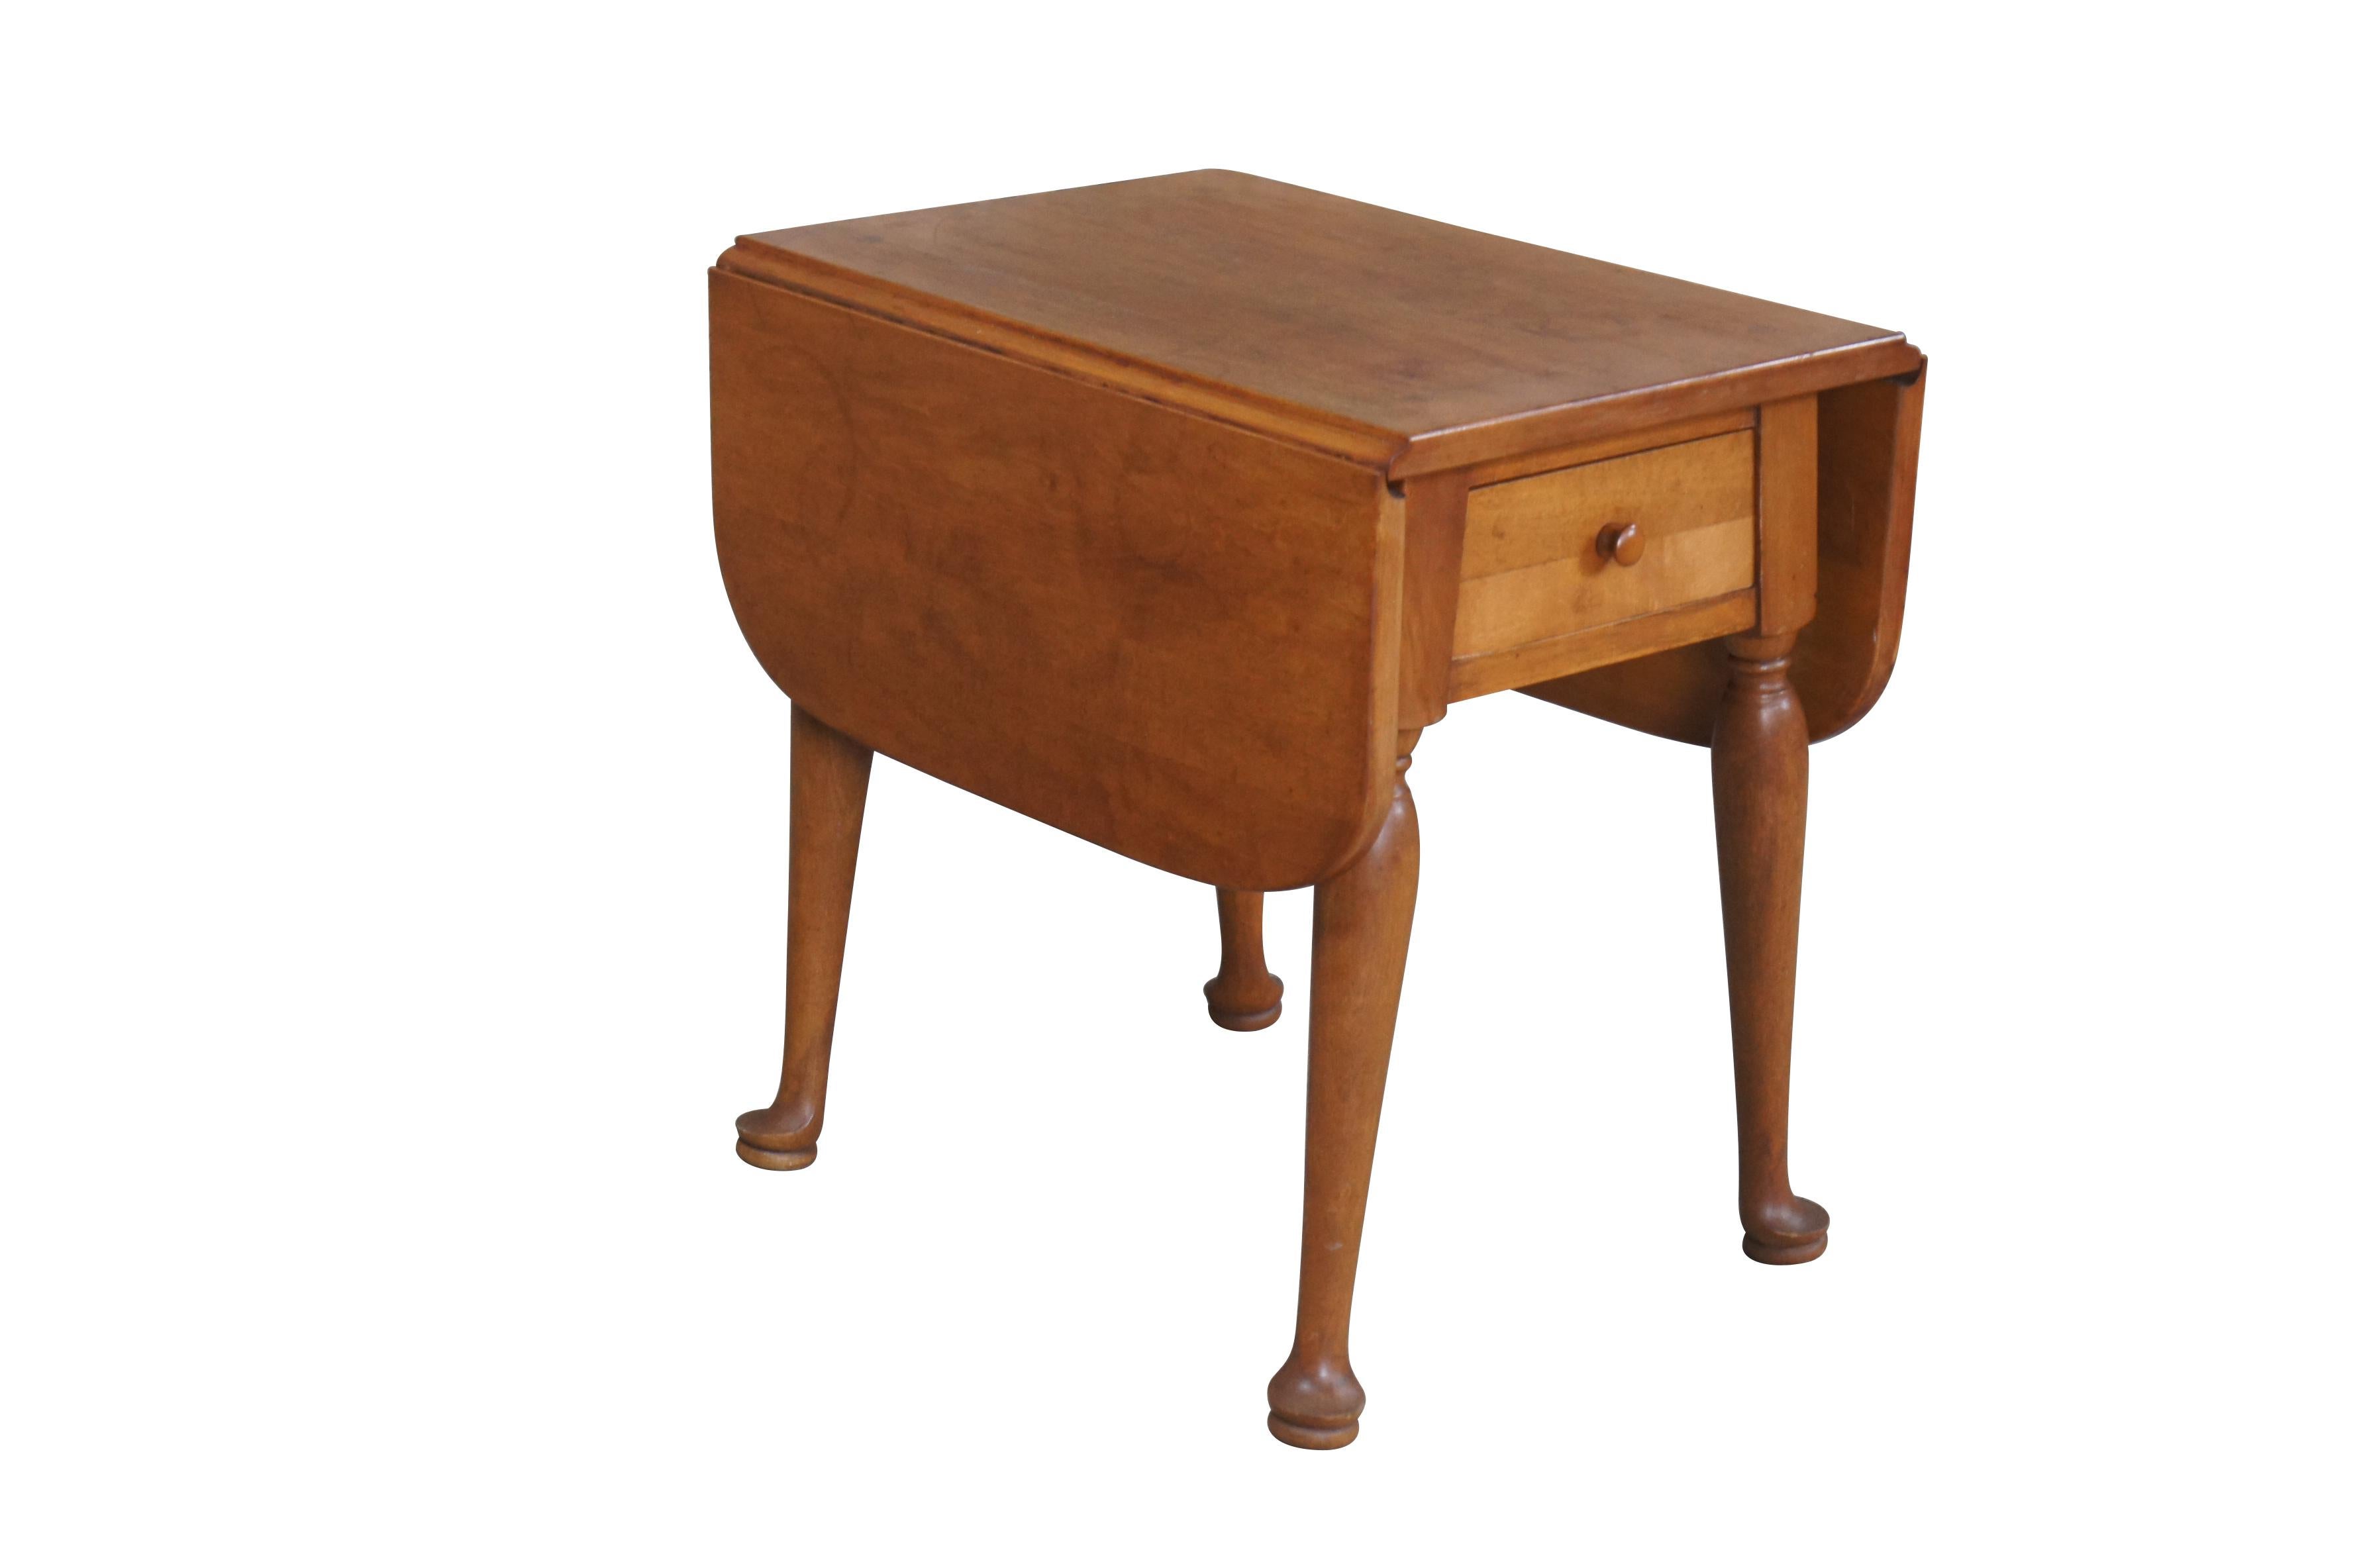 A quaint side table by W.F. Whitney Company, circa mid 20th century.  Features 18th century Early American / William & Mary styling with a central drawer over turned legs leading to pad feet. Marked 3505 long underside.  

W.F. Whitney manufactured